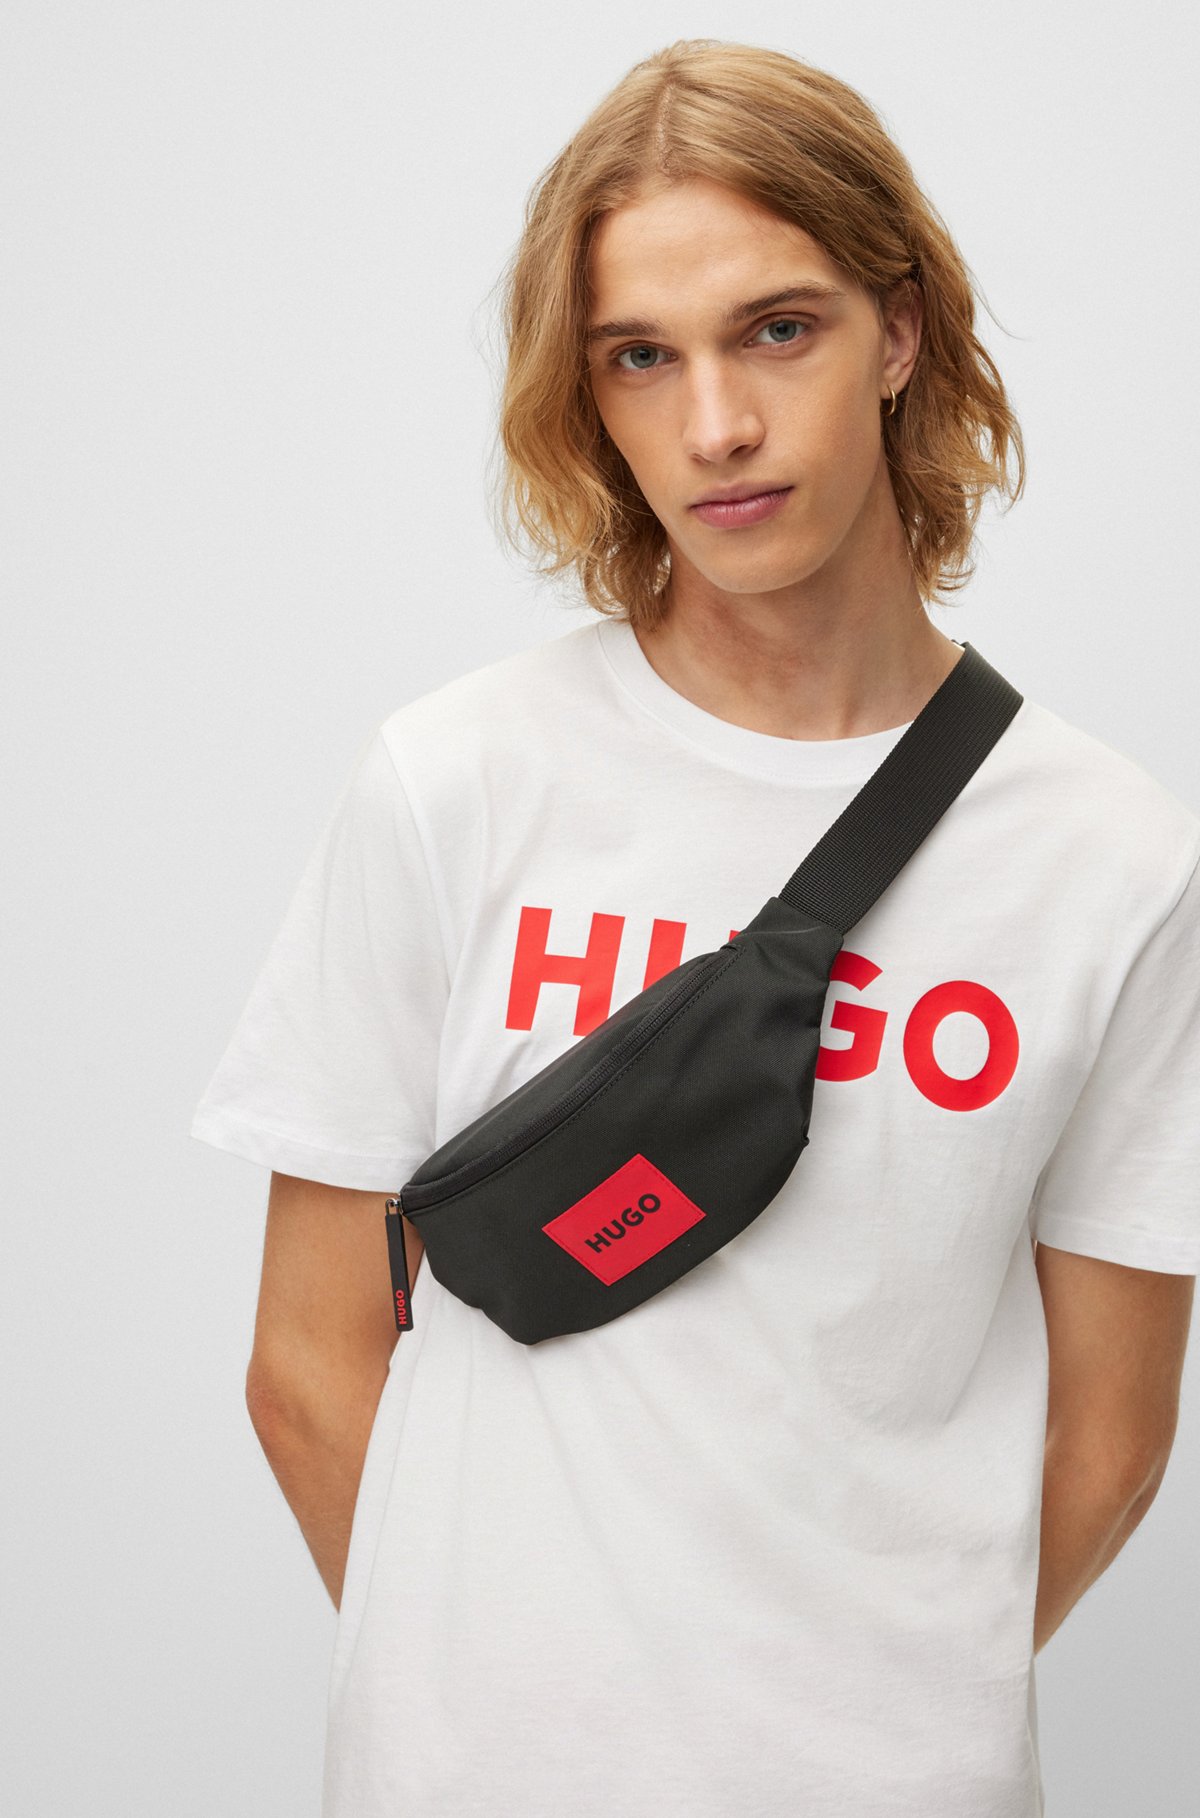 Belt bag in recycled nylon with red logo label, Black